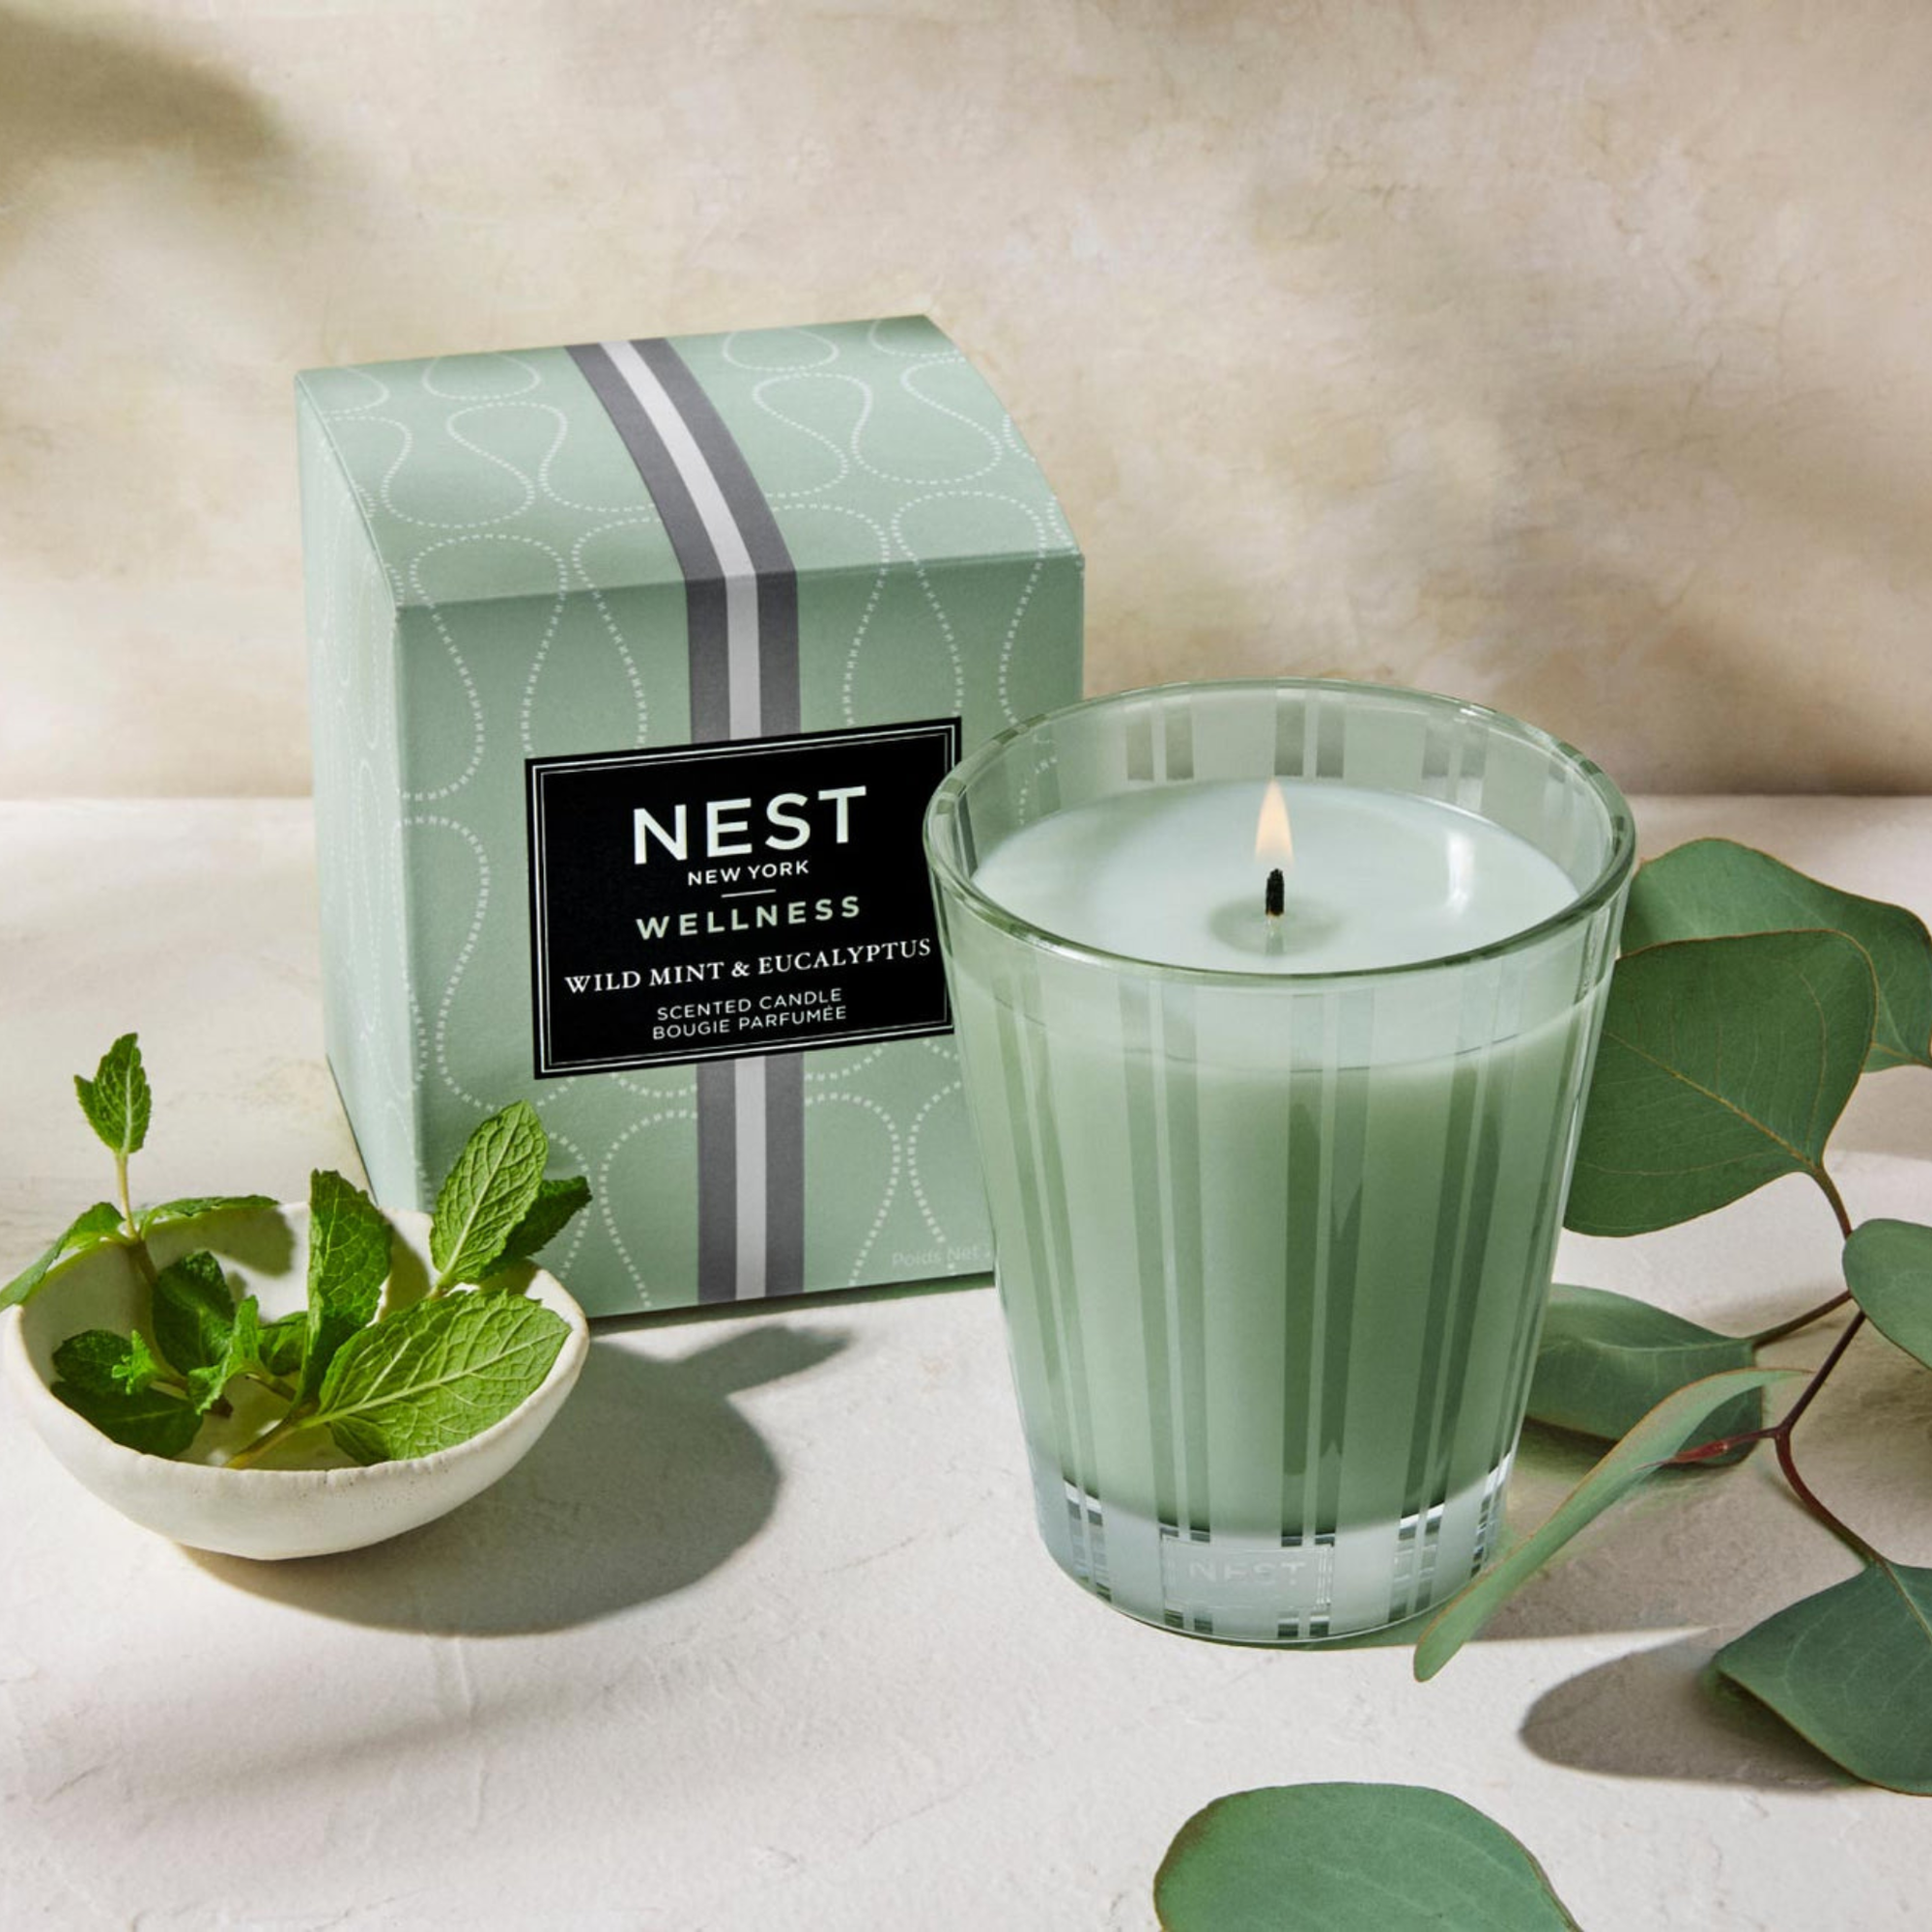 Lifestyle of Nest New York Wild Mint & Eucalyptus Classic Candle with Box